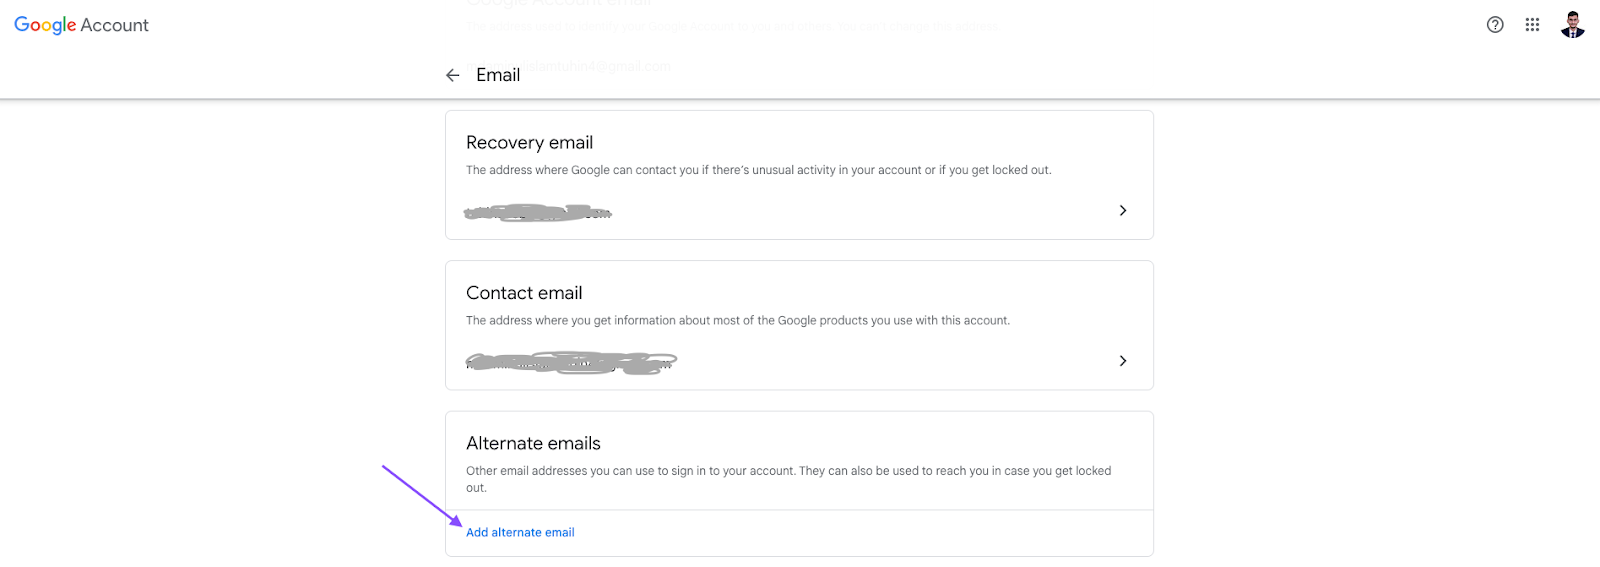 change gmail profile picture of custom email - add alternate email